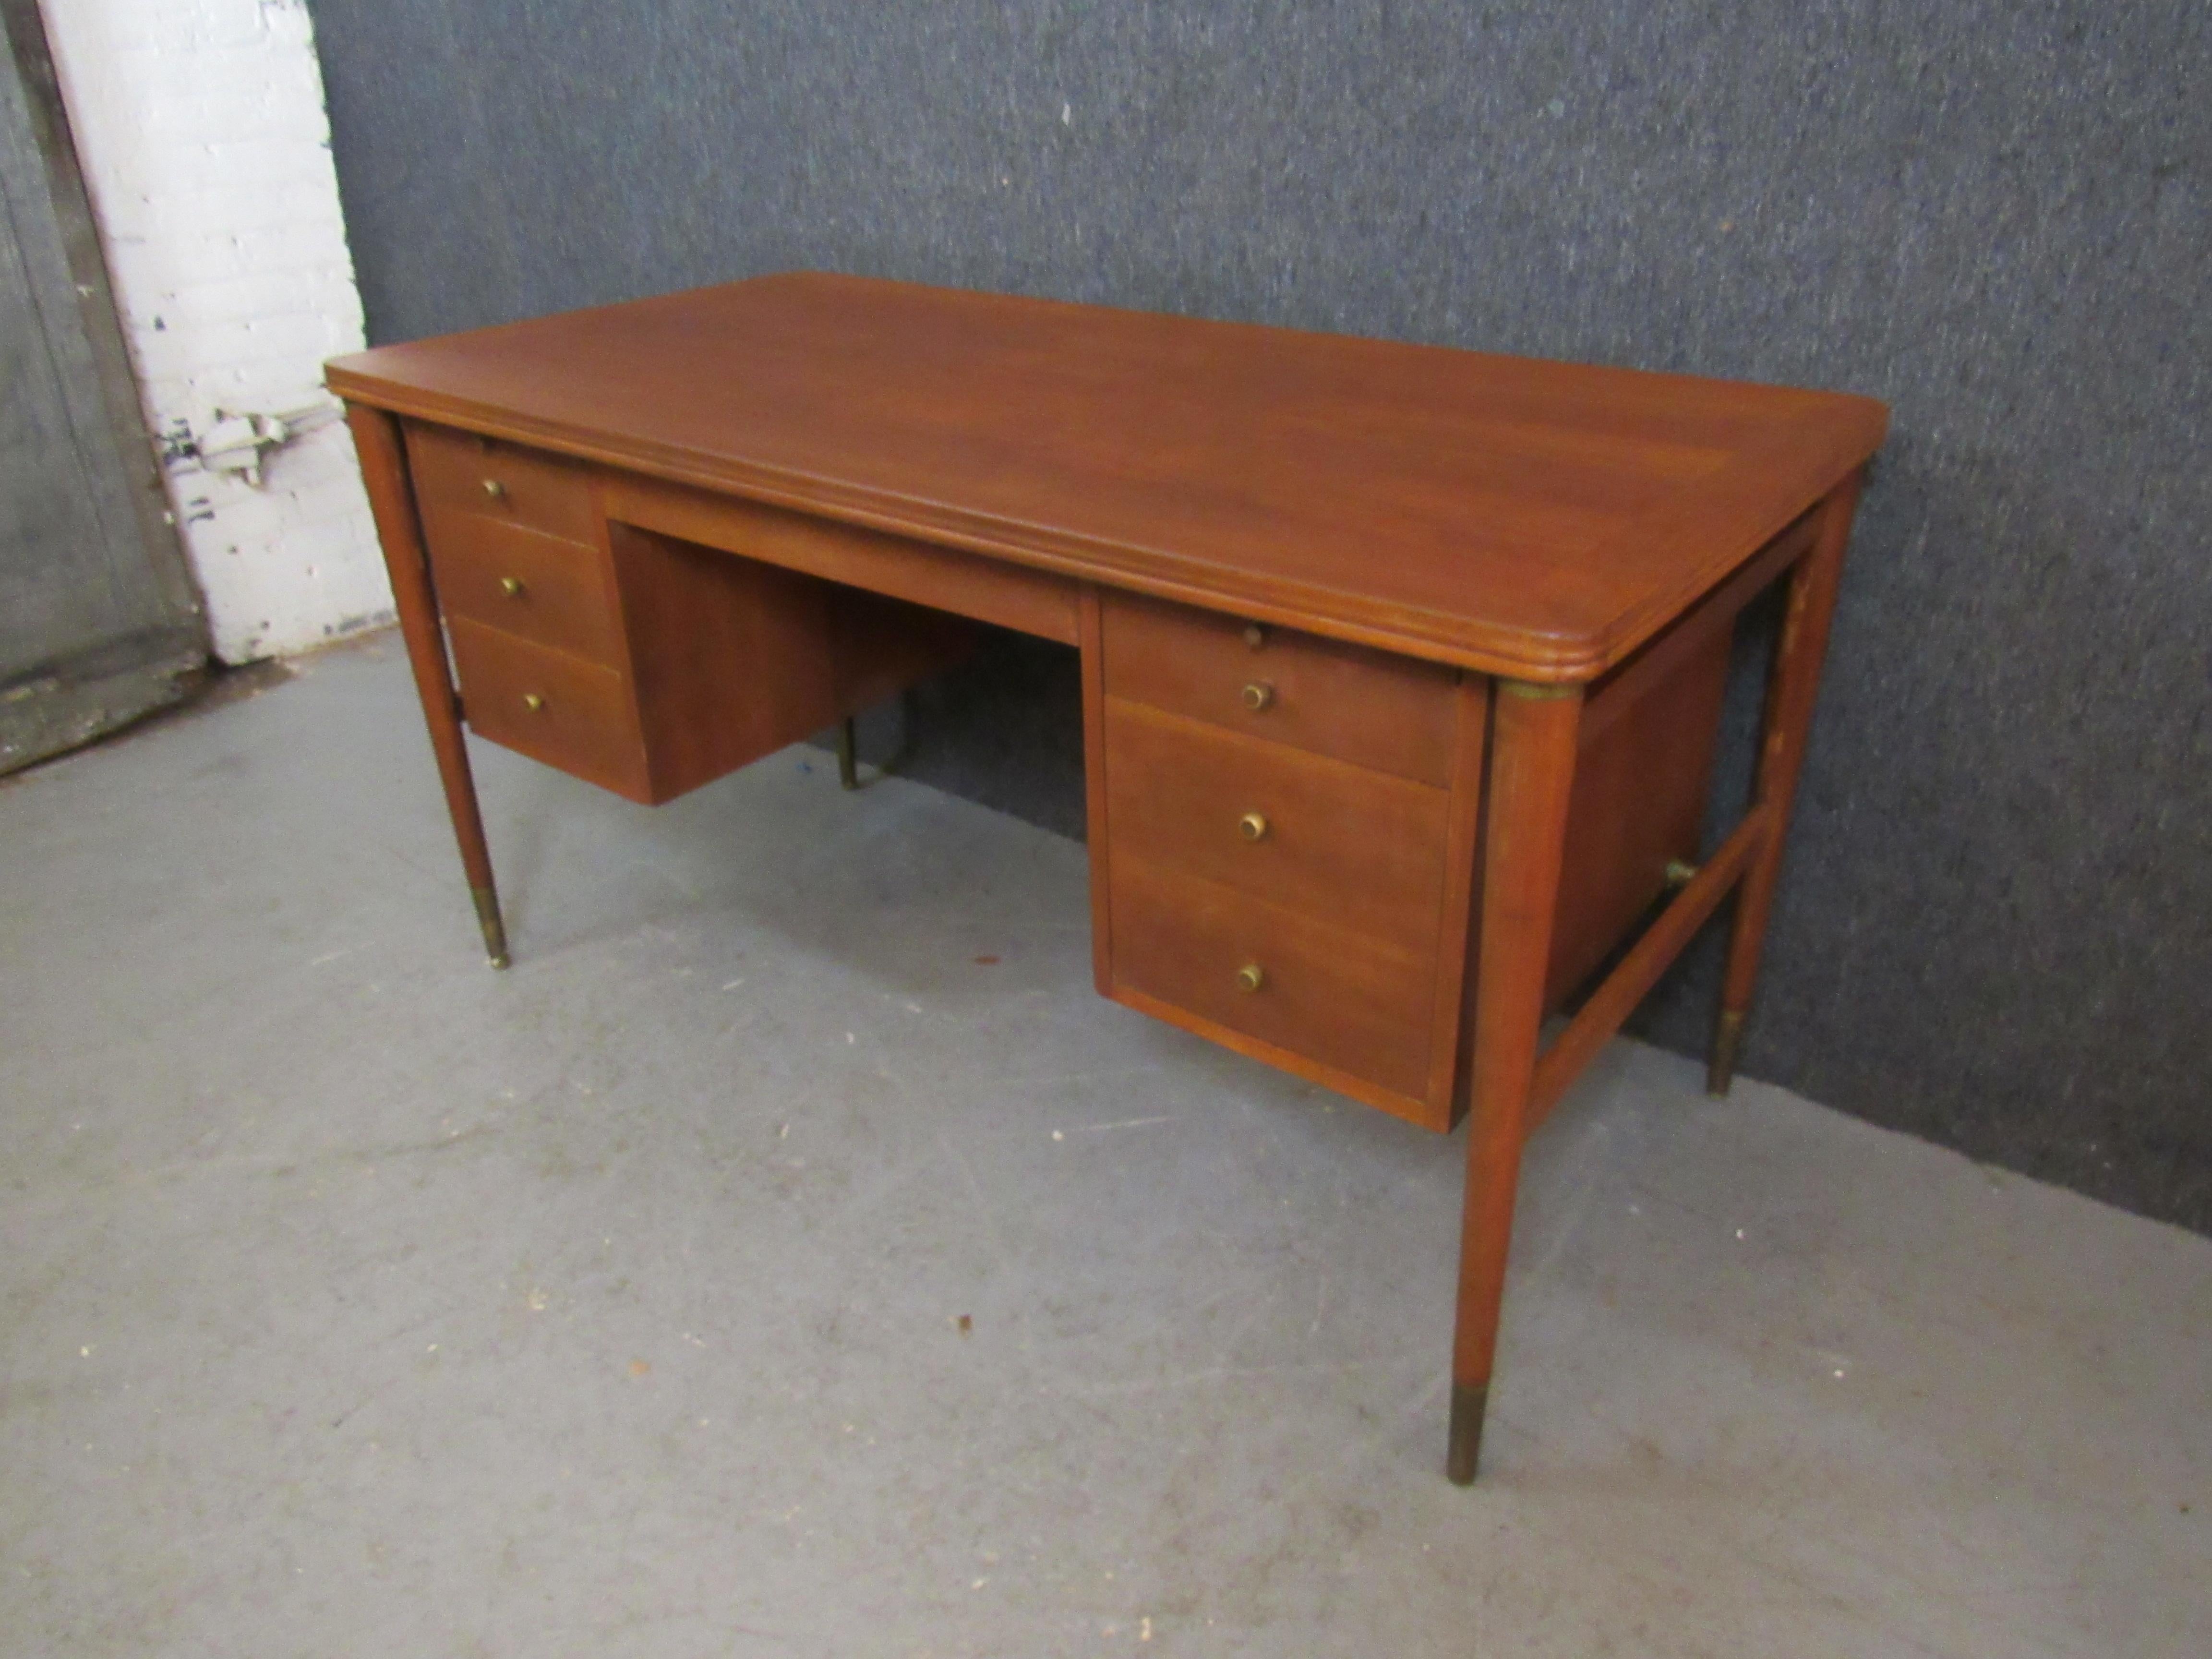 Elegant mid-century vintage desk from skilled craftsmen of Grand Rapids' John Widdicomb Fine Furniture. An ample walnut desktop measuring over 10 square feet offers plenty of workspace for even the biggest projects, while tapered, solid legs give